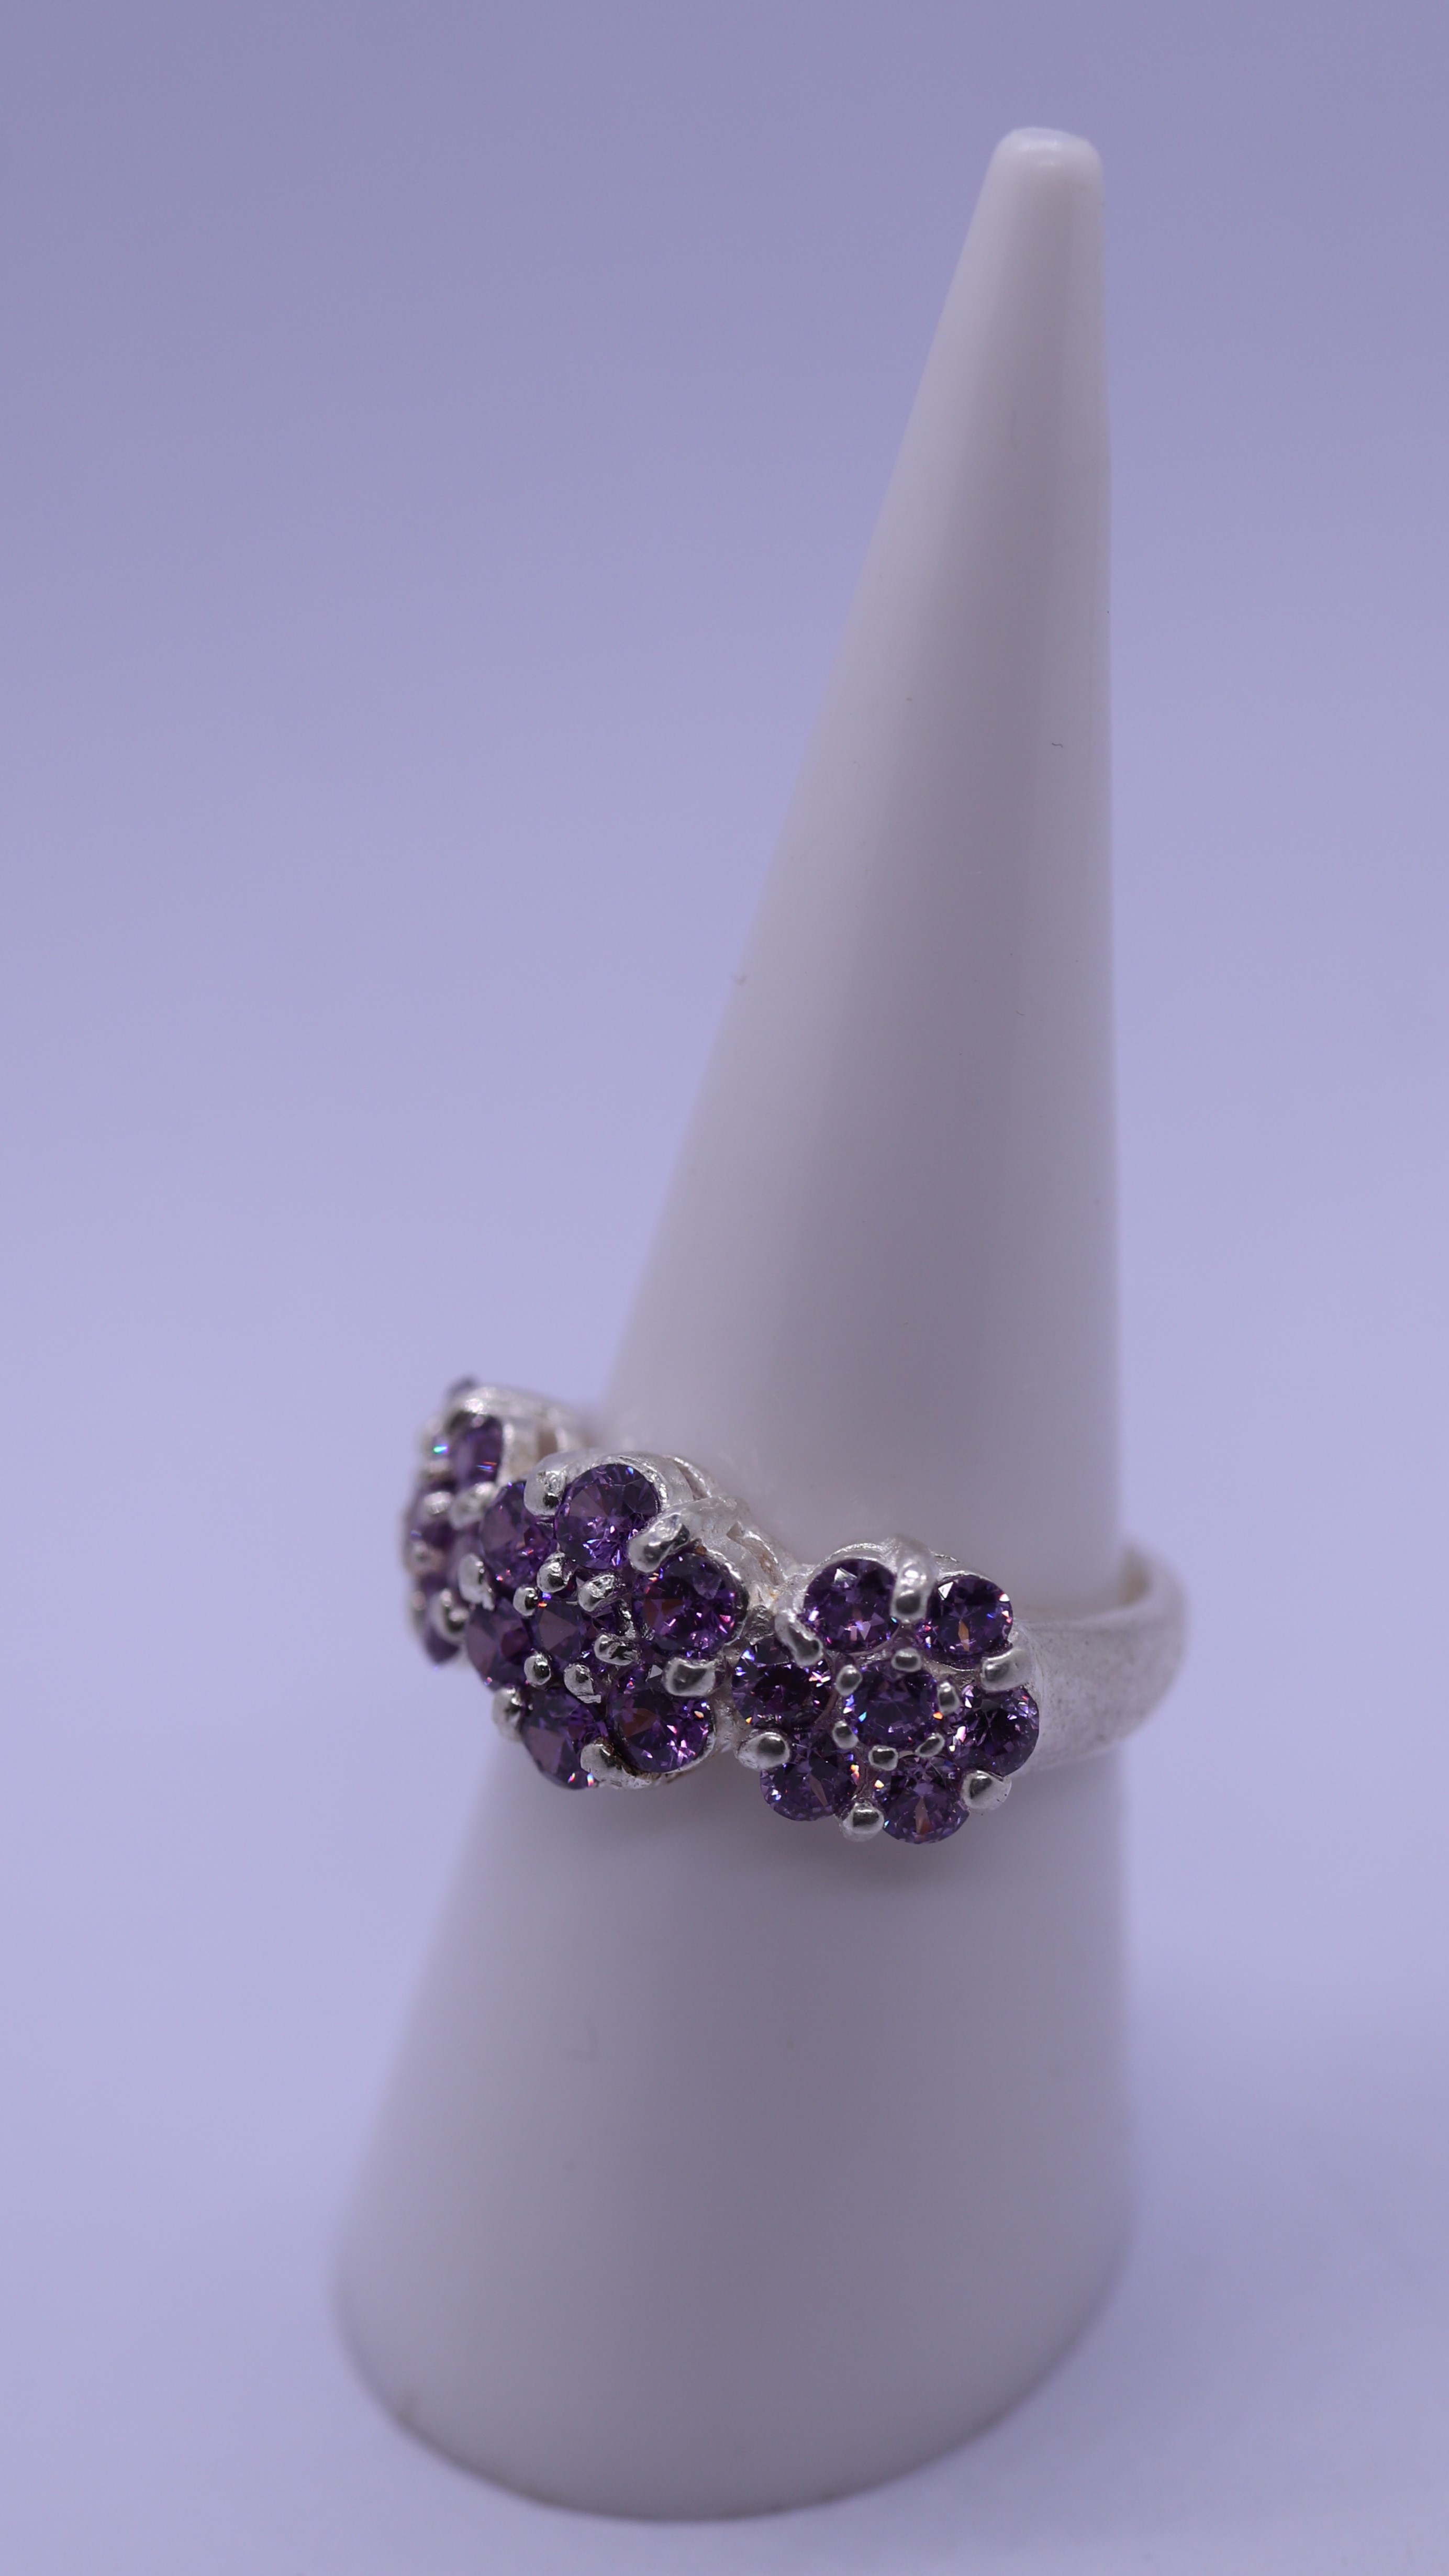 Silver amethyst set ring - Size M - Image 2 of 3